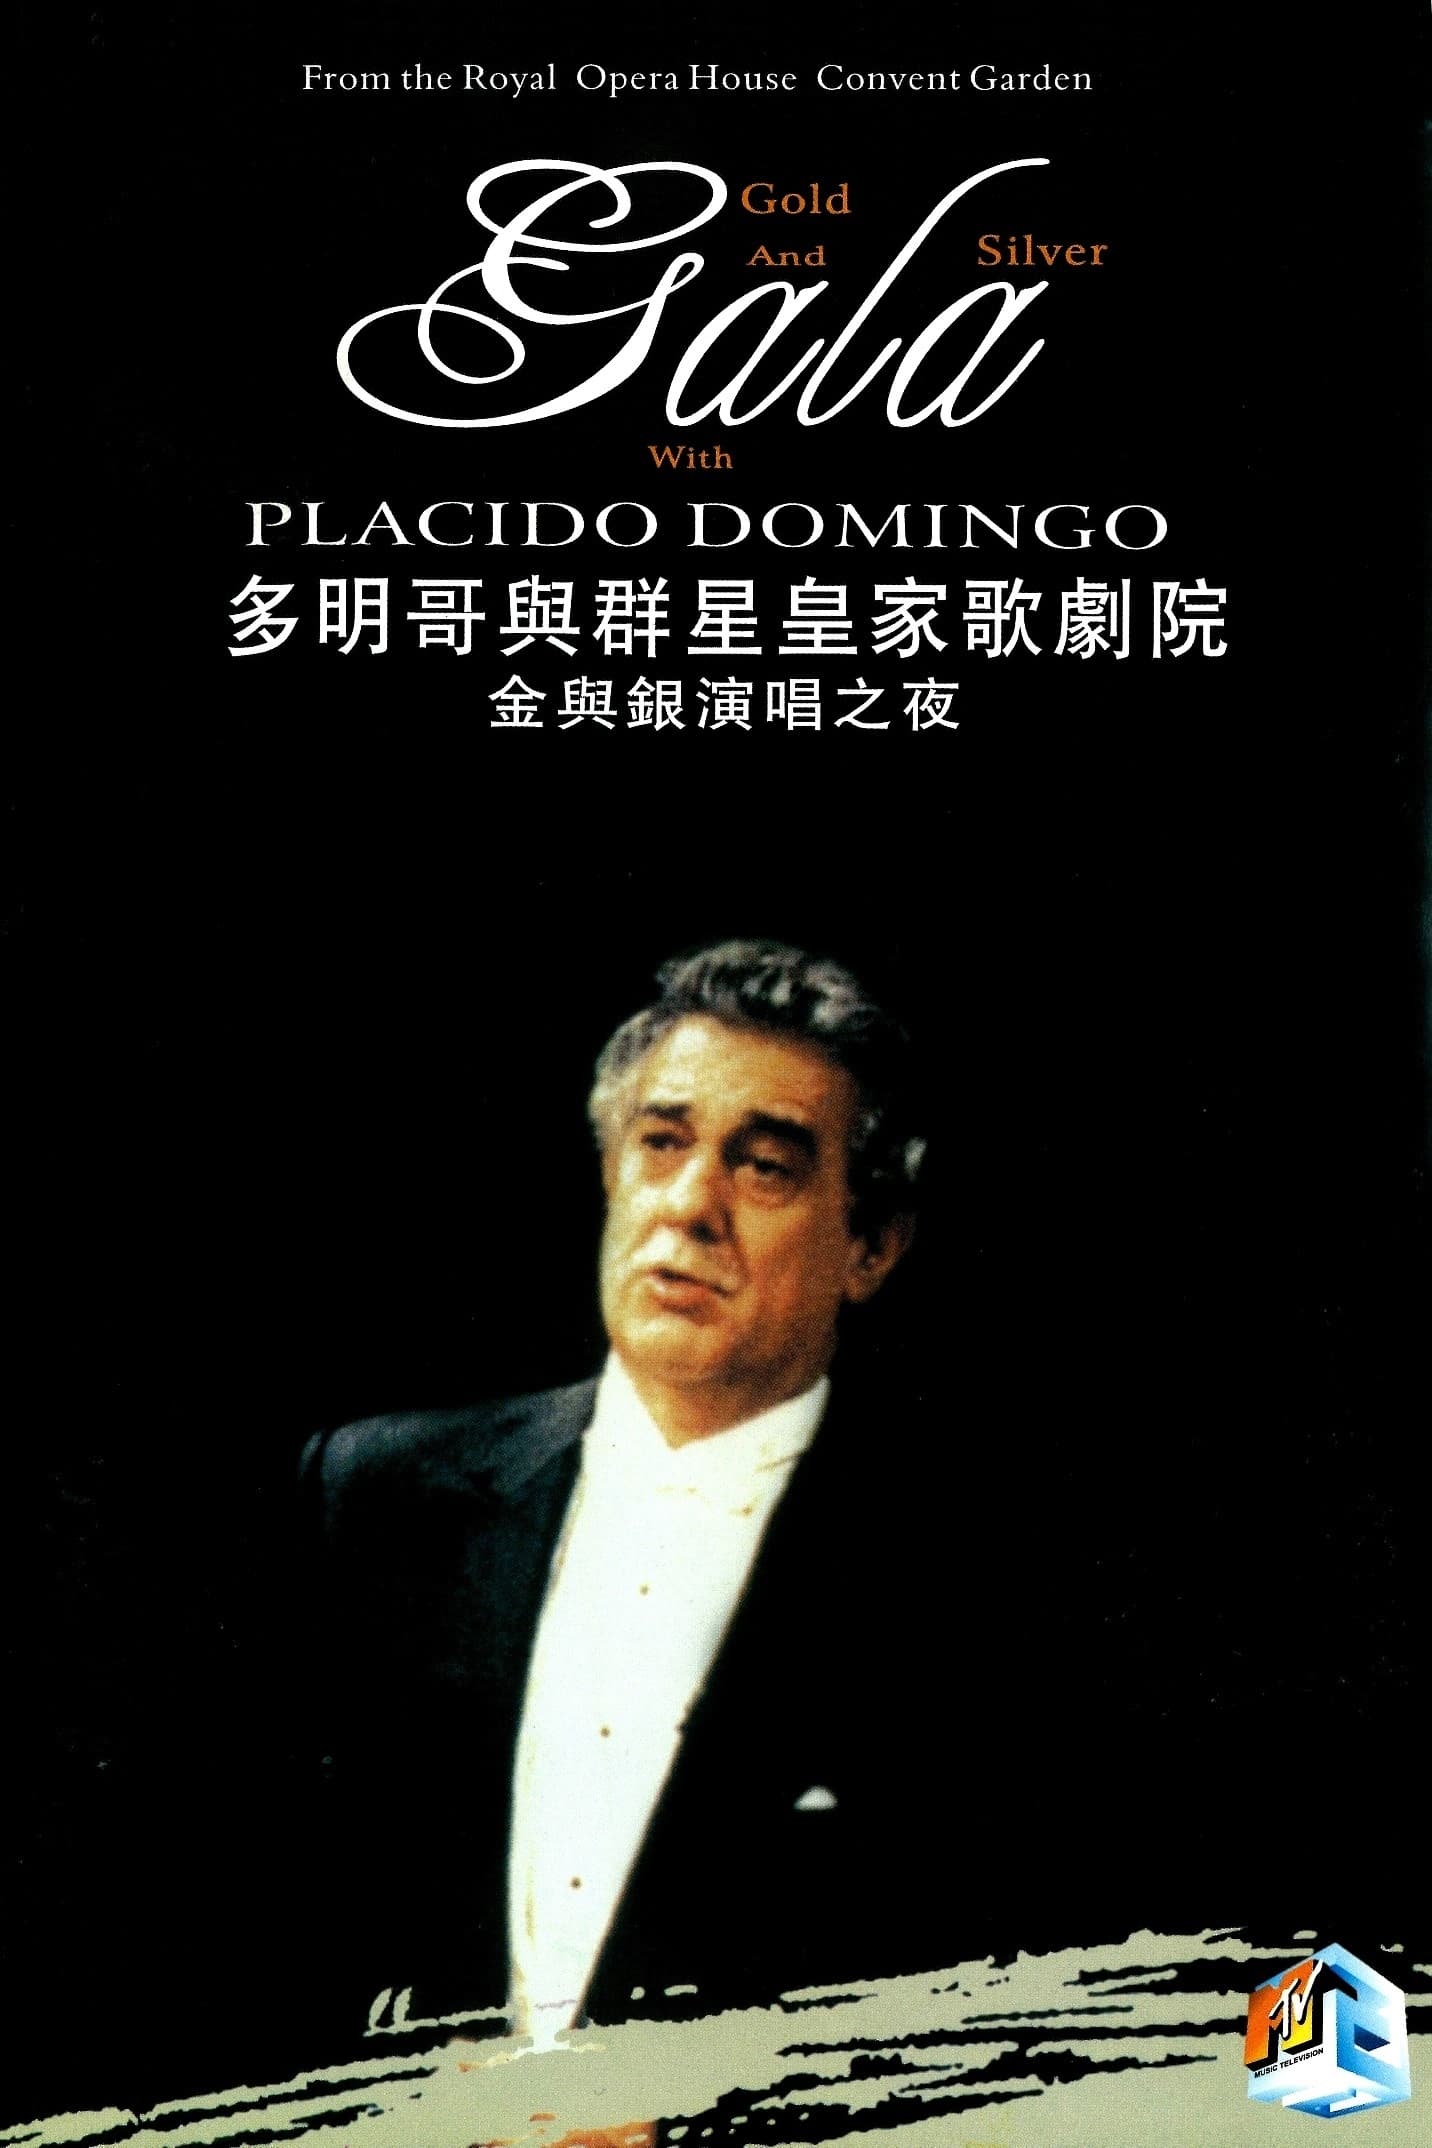 Gold and Silver Gala with Placido Domingo